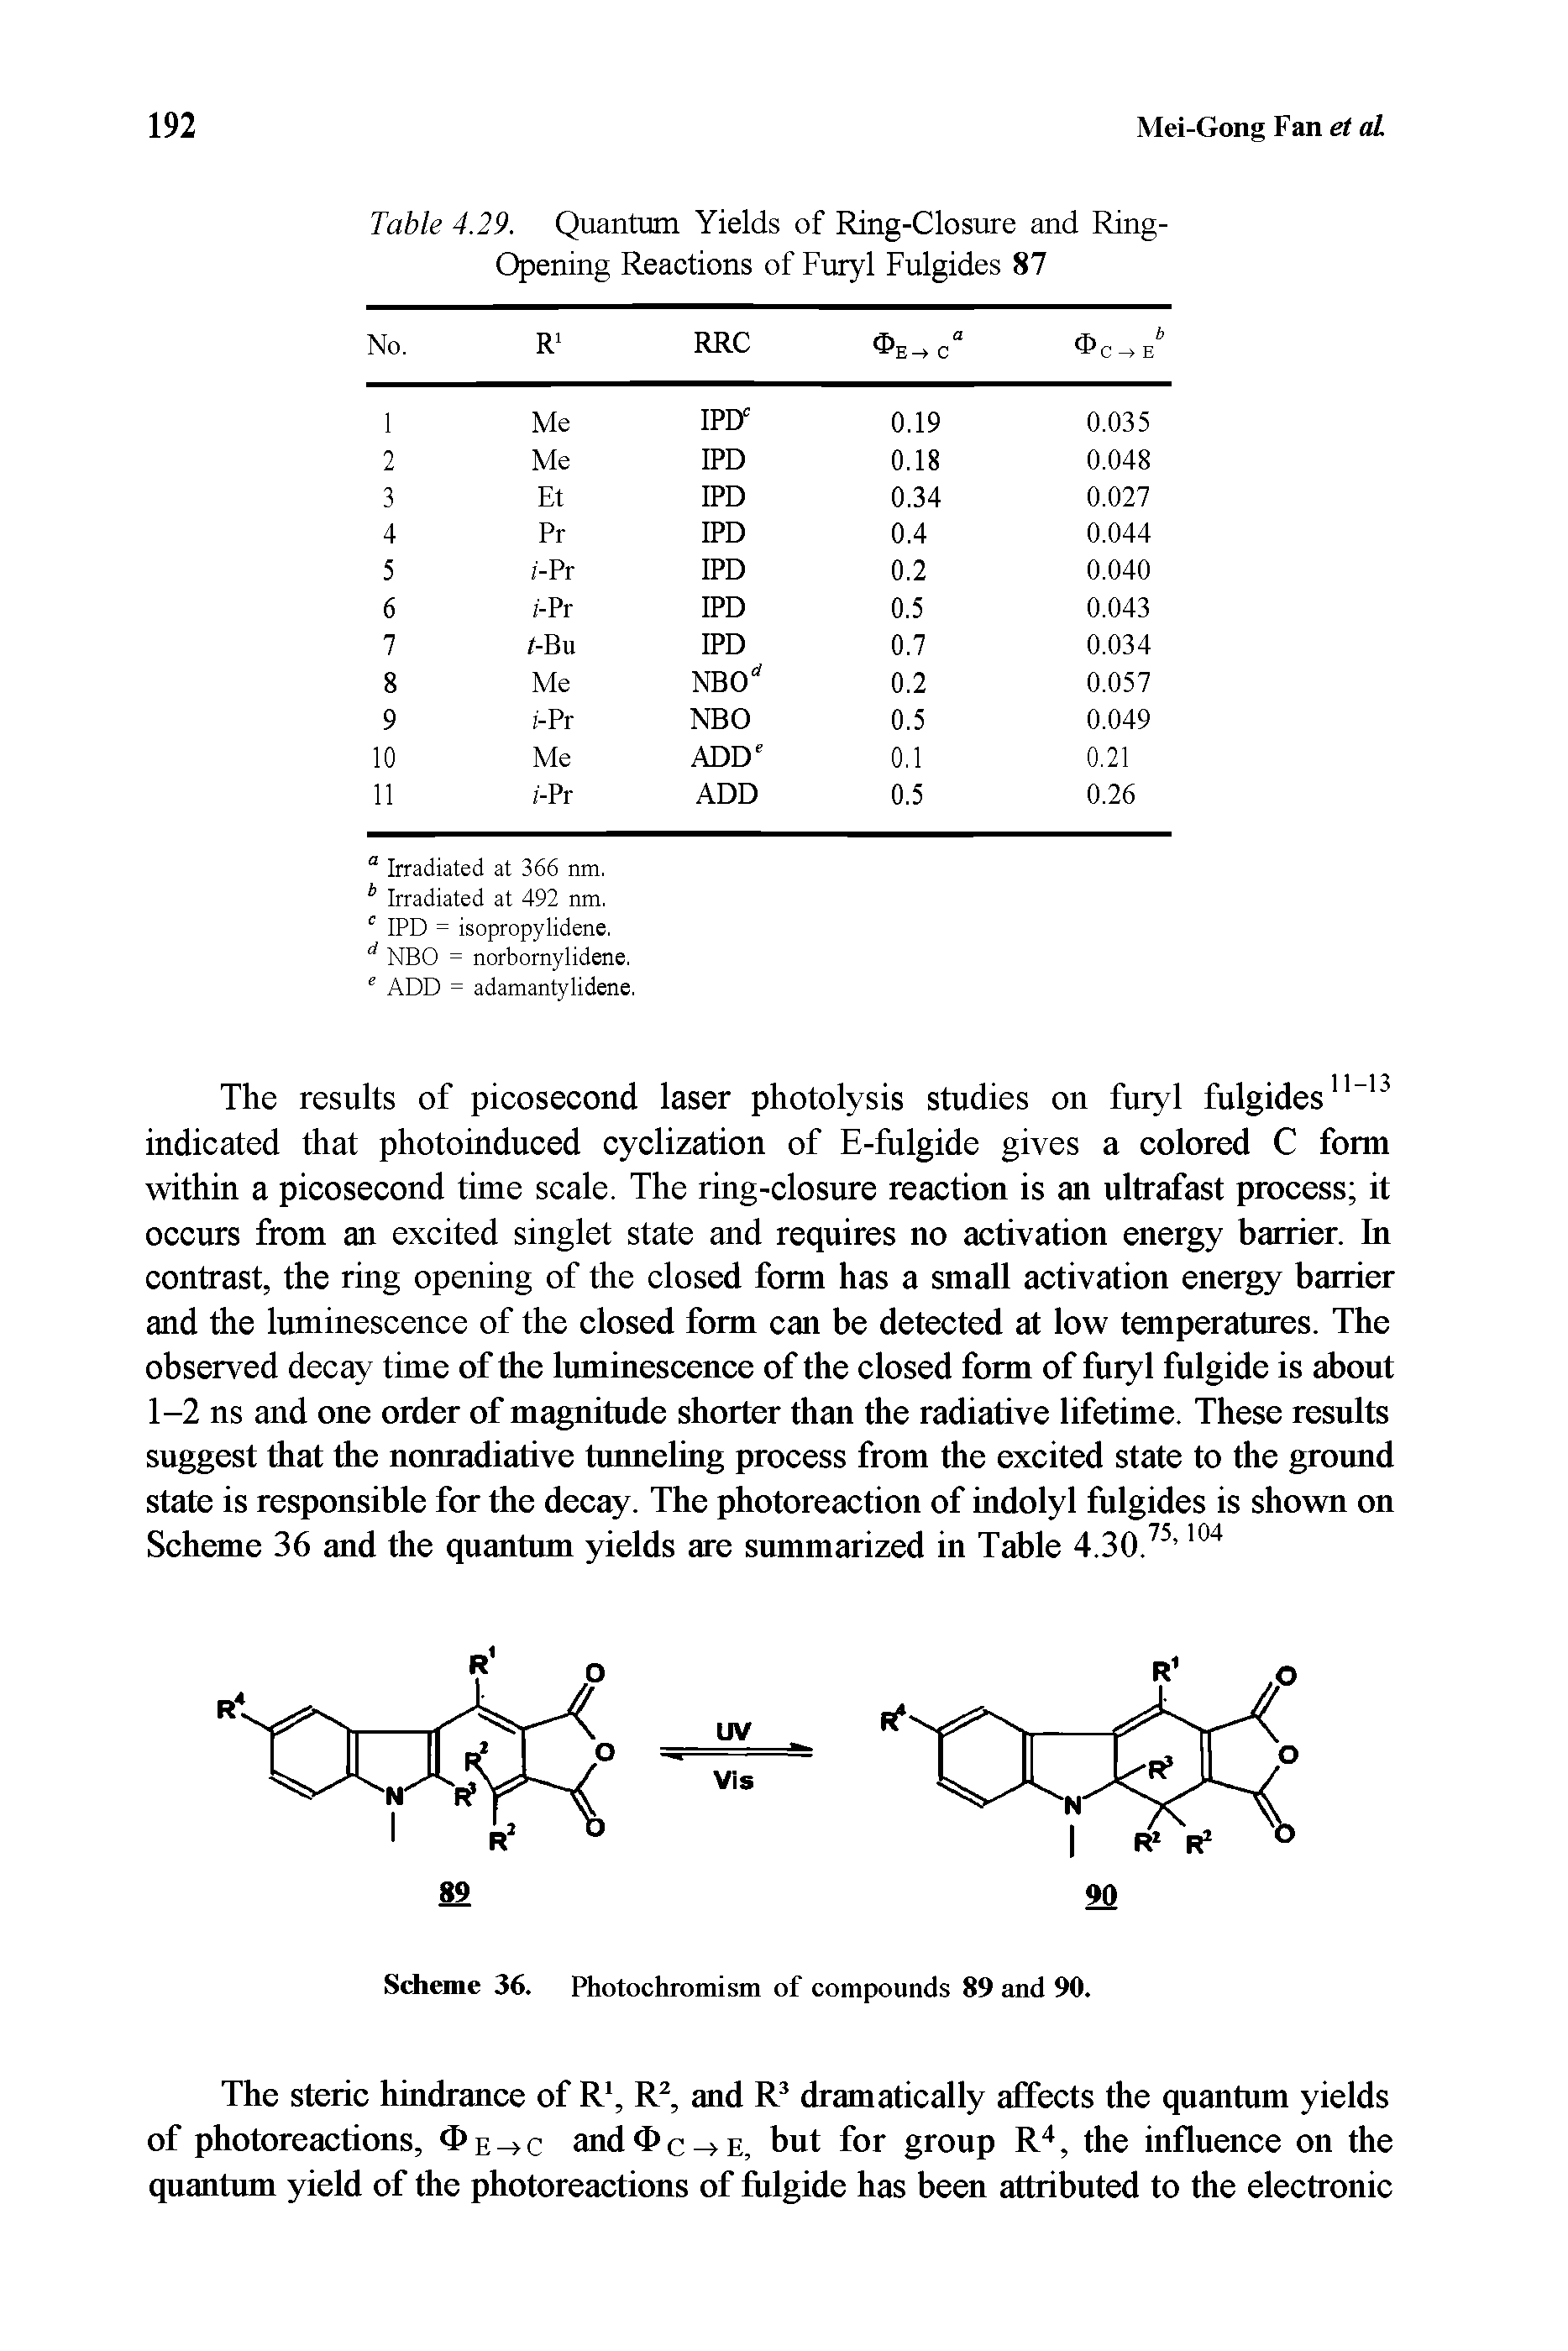 Table 4.29. Quantum Yields of Ring-Closure and Ring-Opening Reactions of Furyl Fulgides 87...